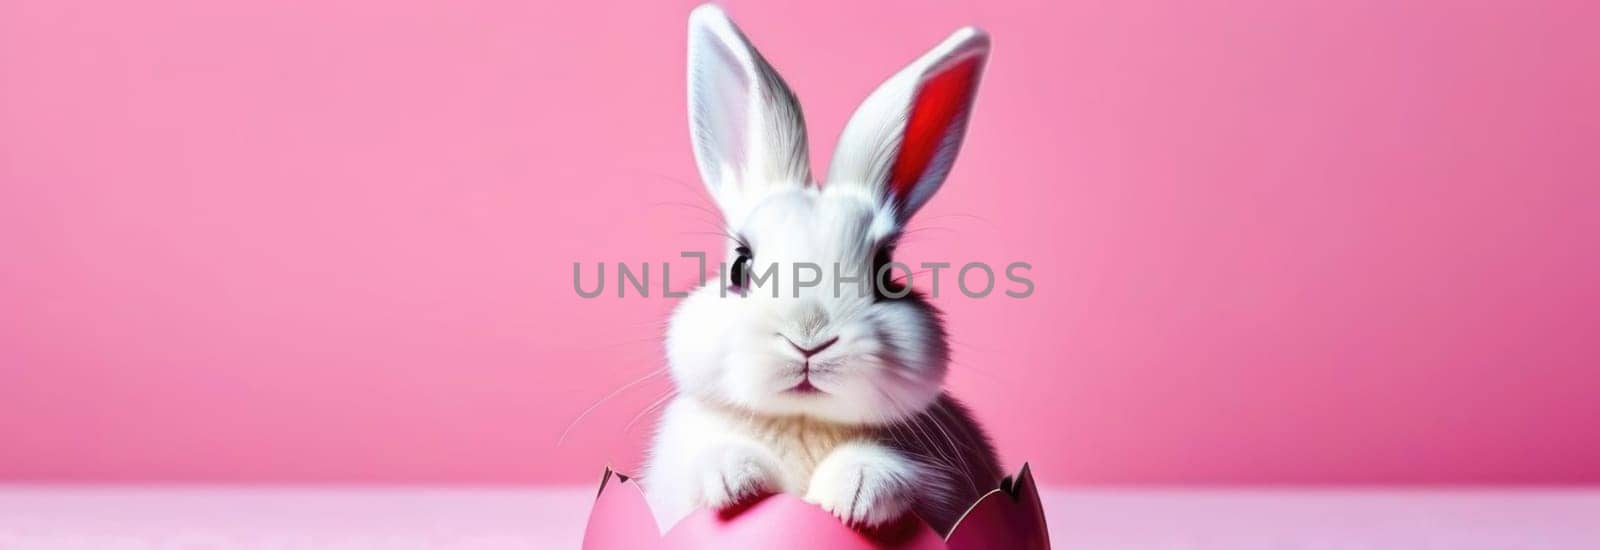 Happy Easter banner with cute Easter bunny hatching from pink Easter egg on pastel pink background. Illustration of Easter rabbit sitting in cracked eggshell. Happy Easter greeting card. Copy space